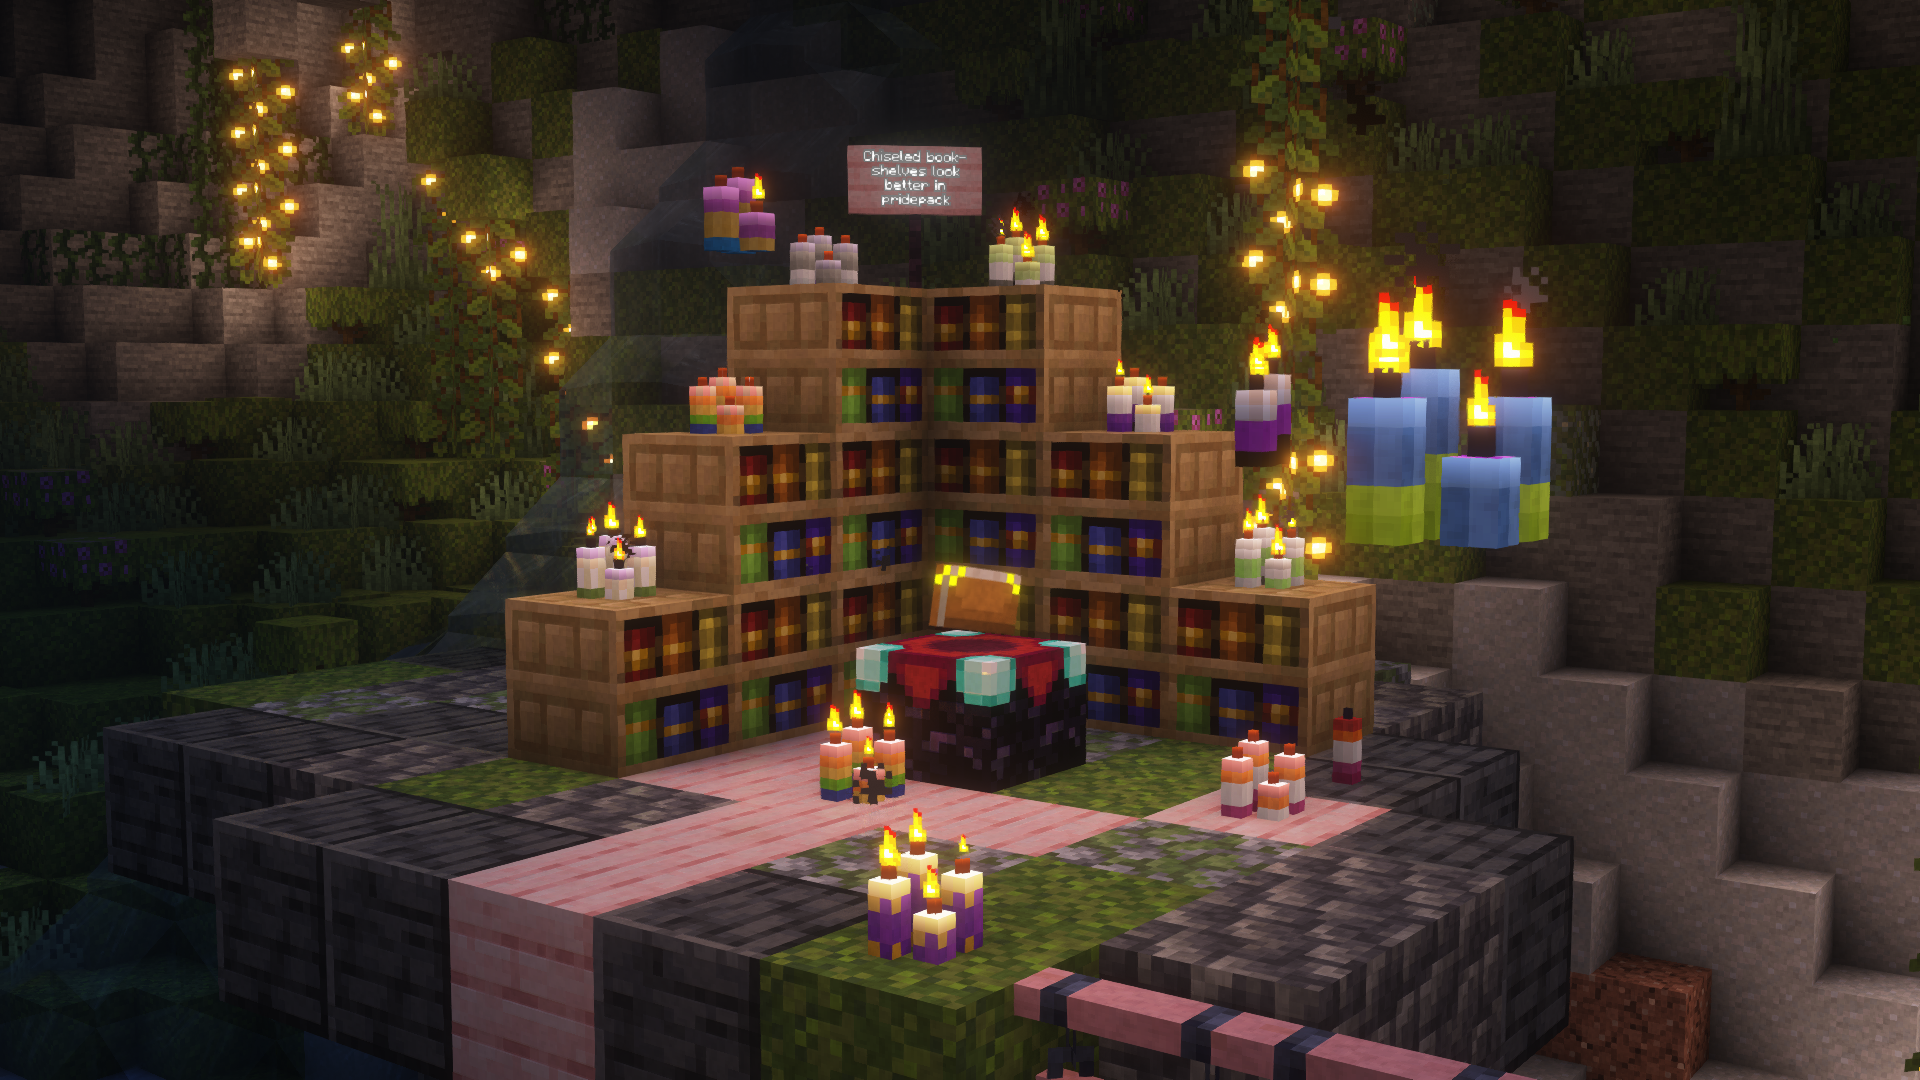 The chiseled bookshelves and candle textures from PridePack